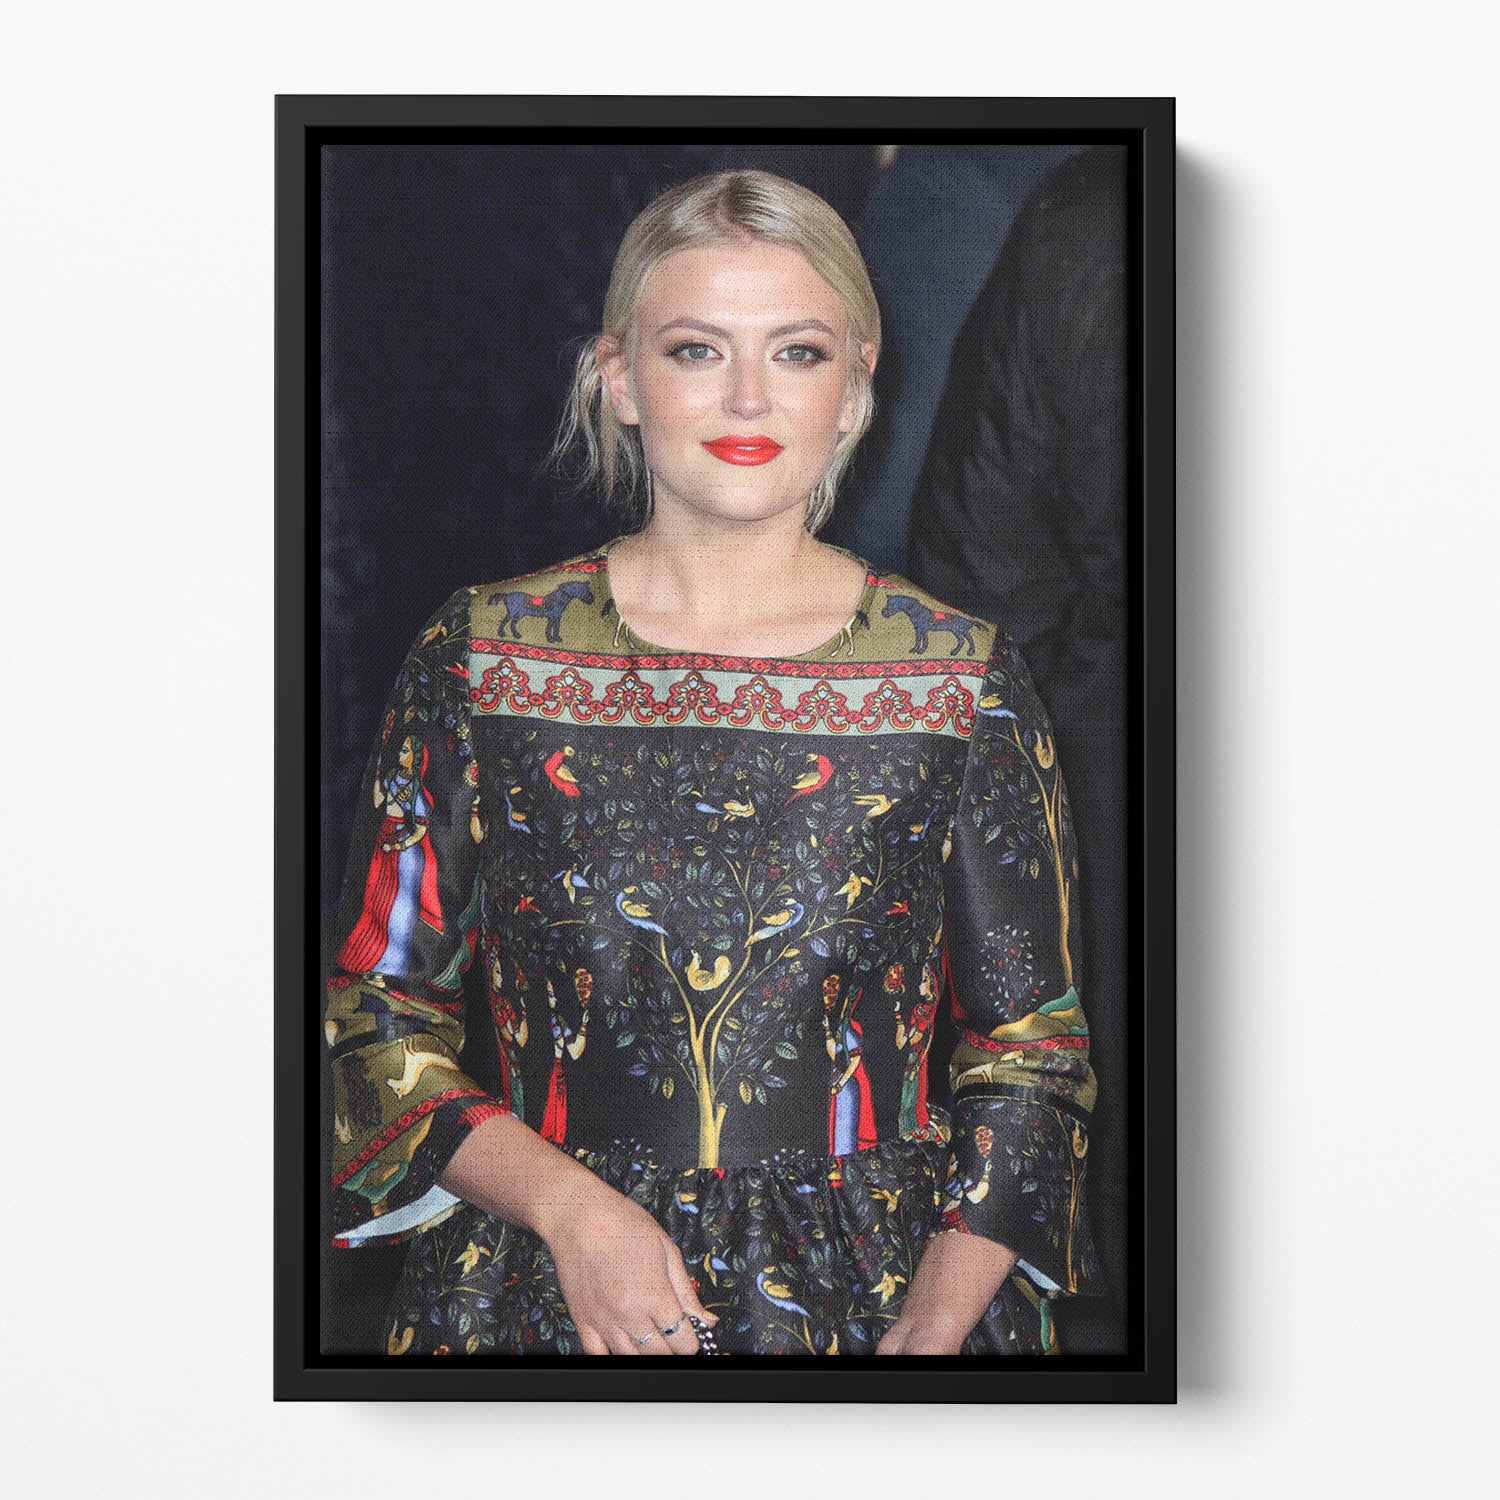 Lucy Fallon Floating Framed Canvas